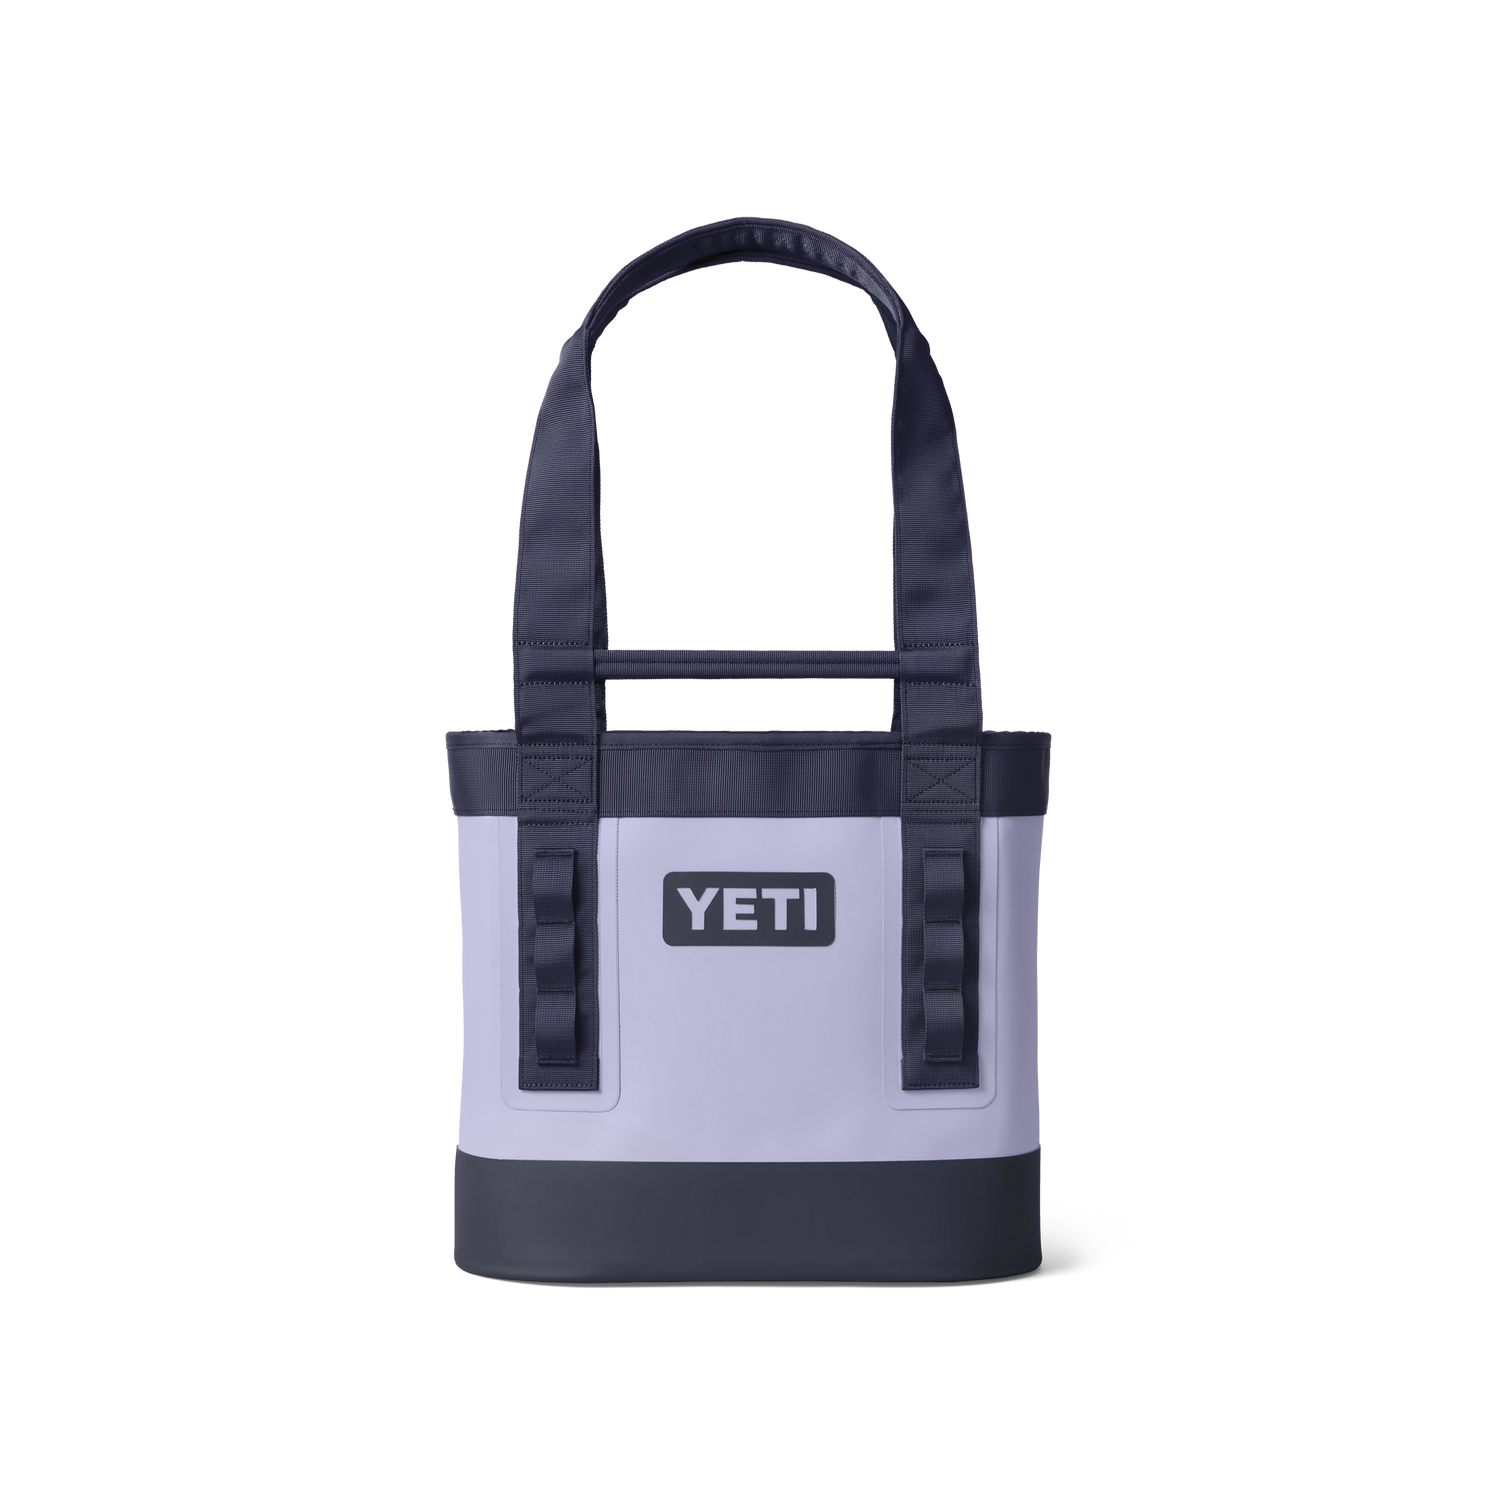 YETI coolers announces limited edition fall colors